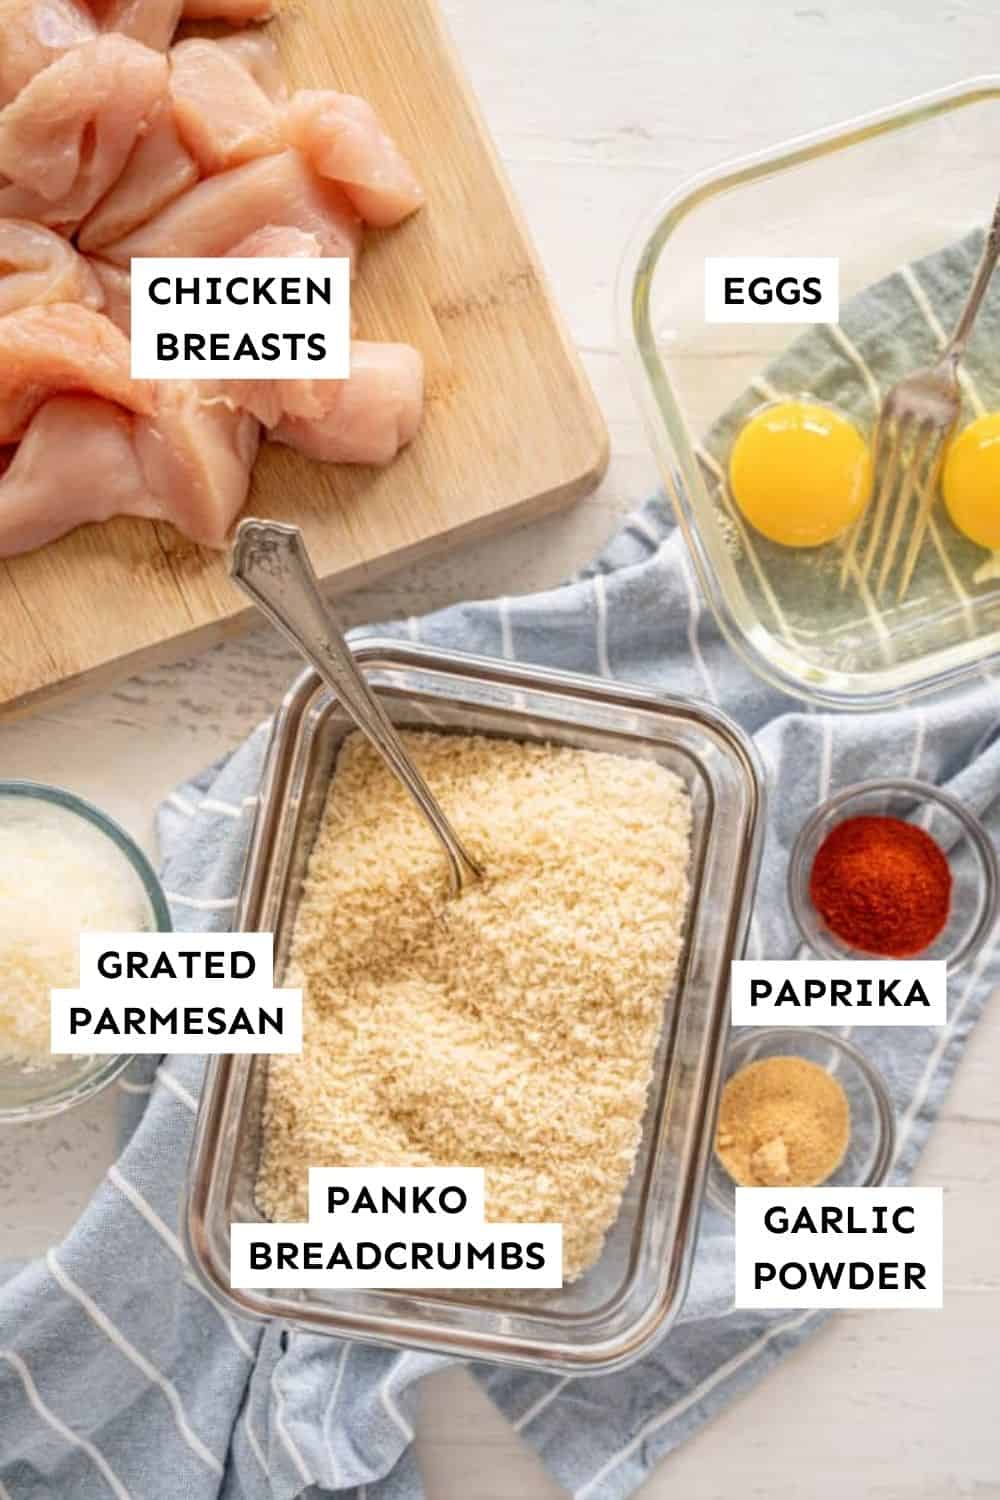 Ingredients for chicken nuggets displayed on a kitchen counter.